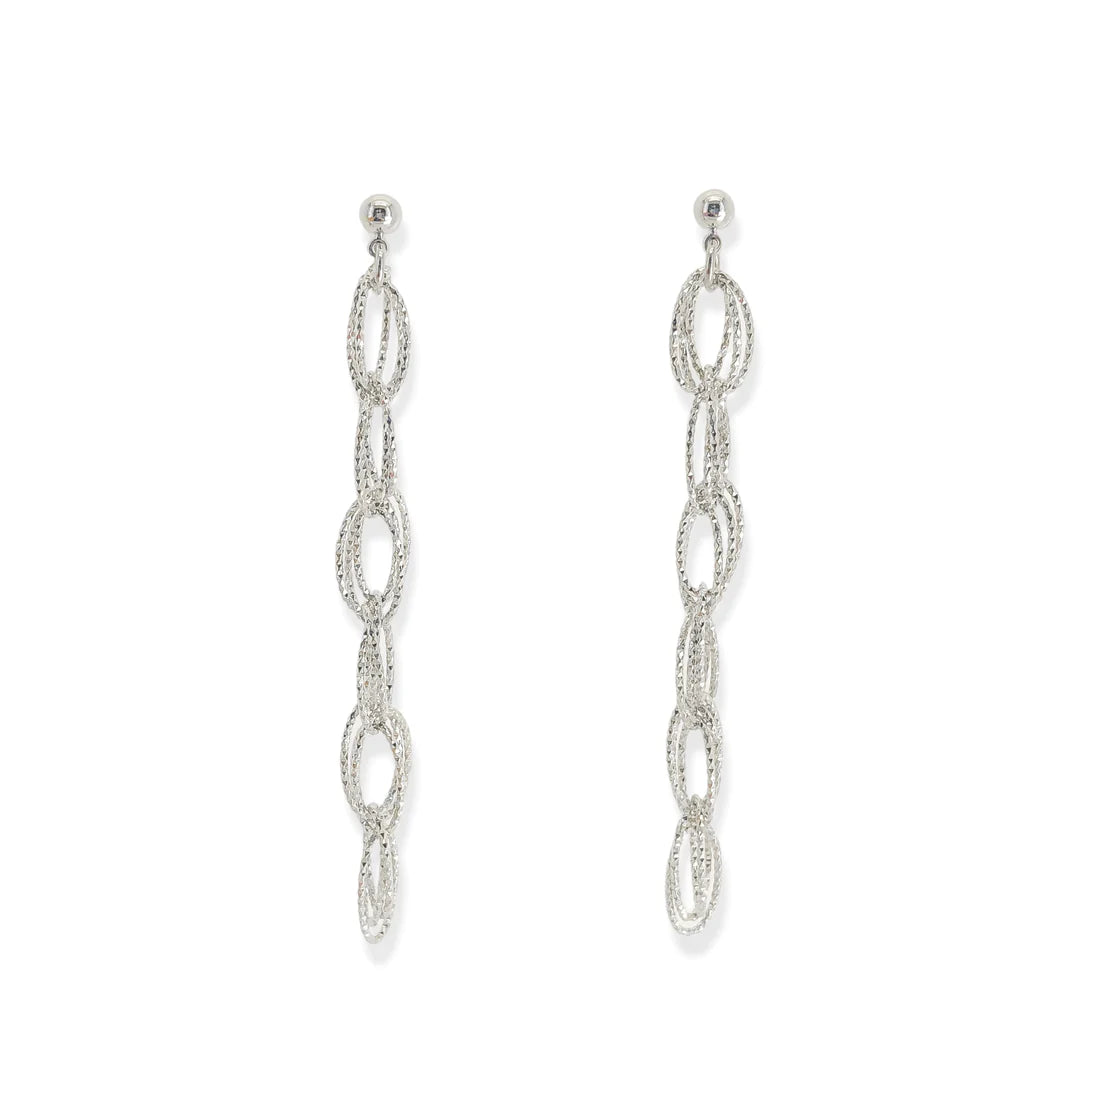 AER074 -Textured Oval Chain Earrings